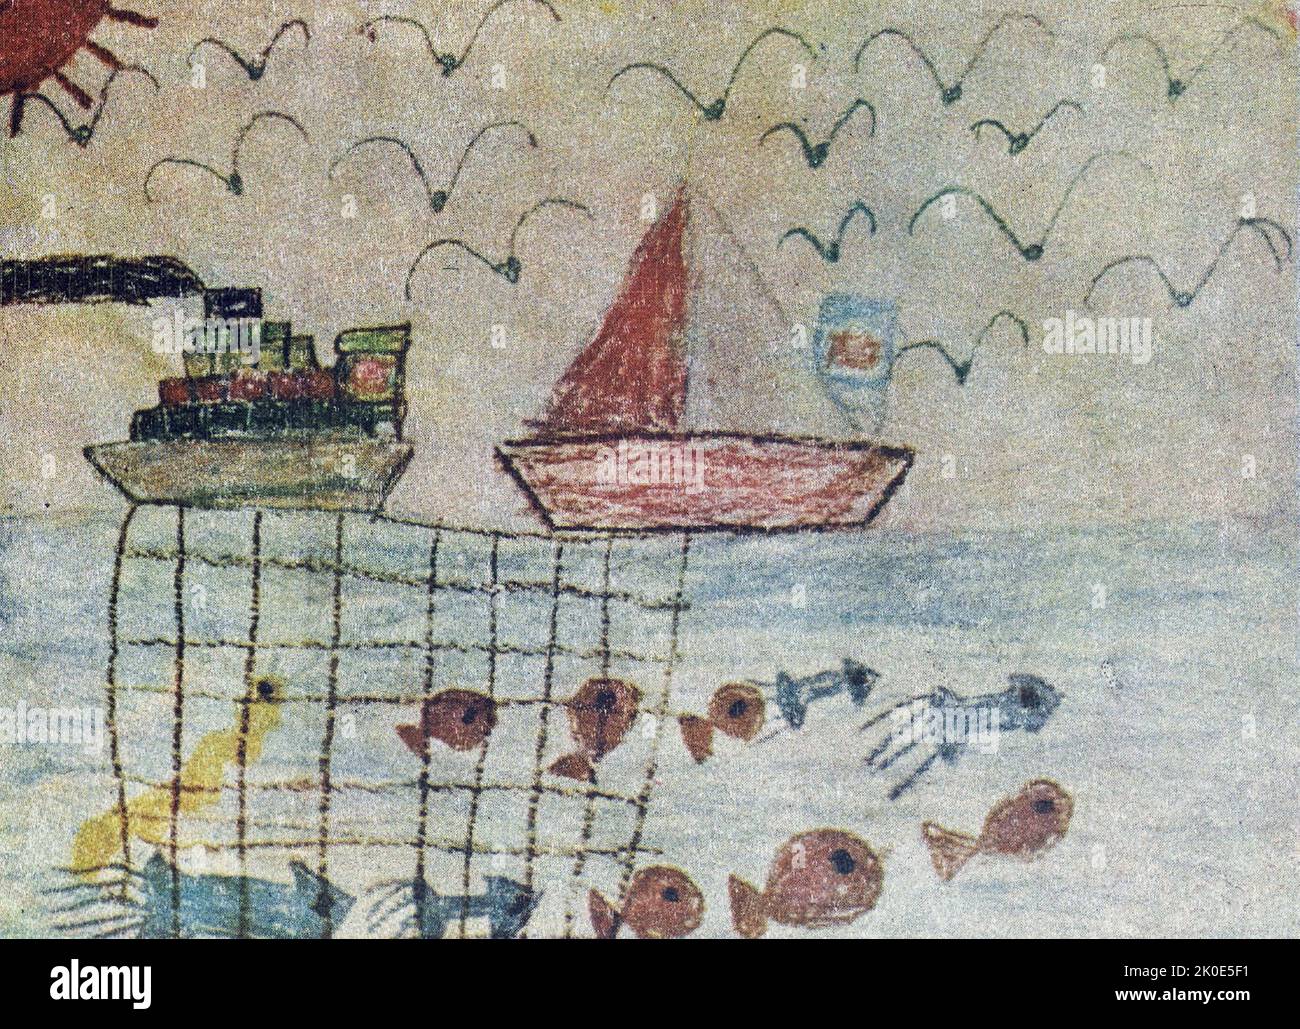 North Korean art: Most Bountiful Year (Crayons) by Kim Young-Seok 8 years old. 1963. Stock Photo